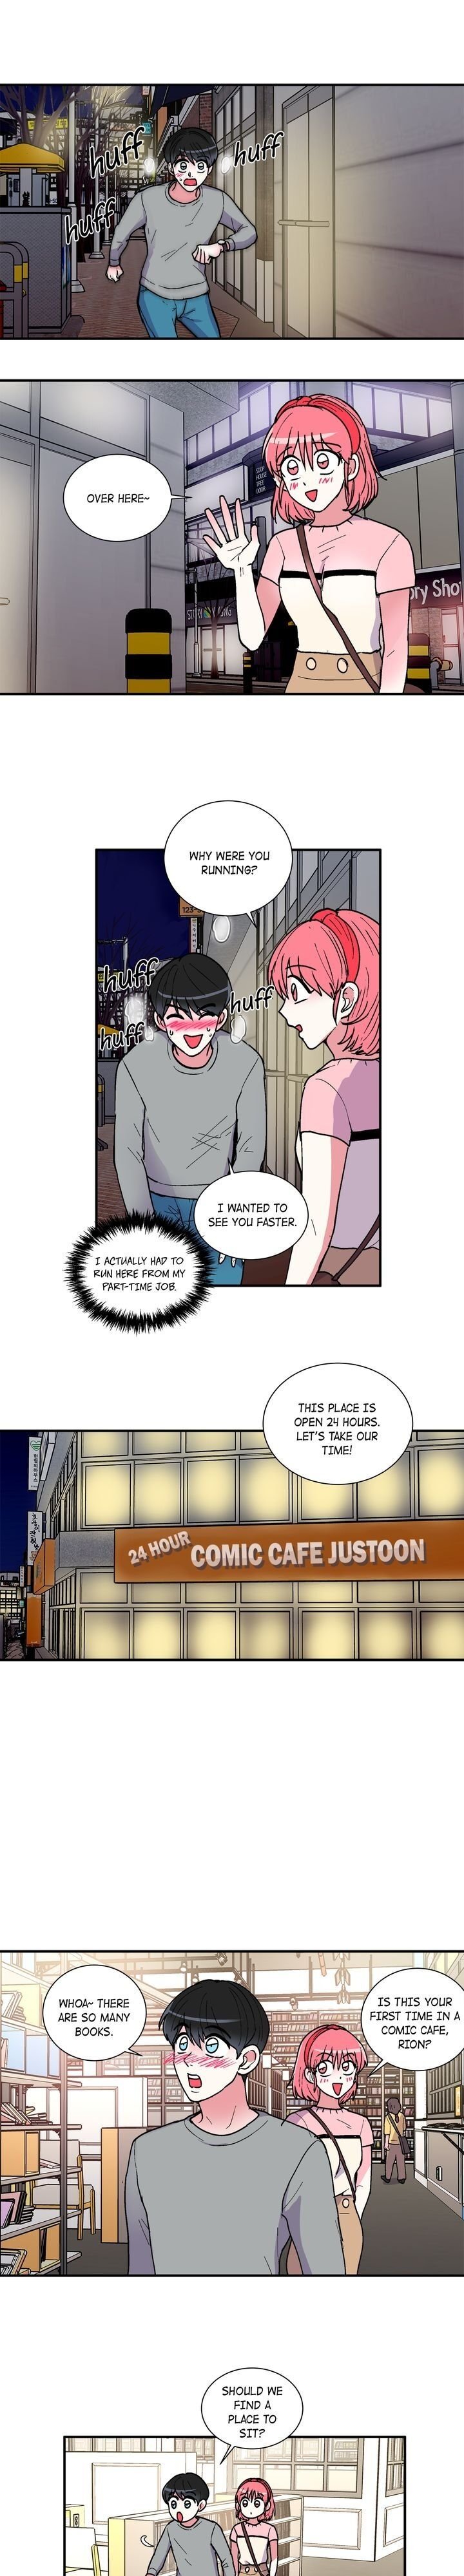 come-here-darling-chap-33-5